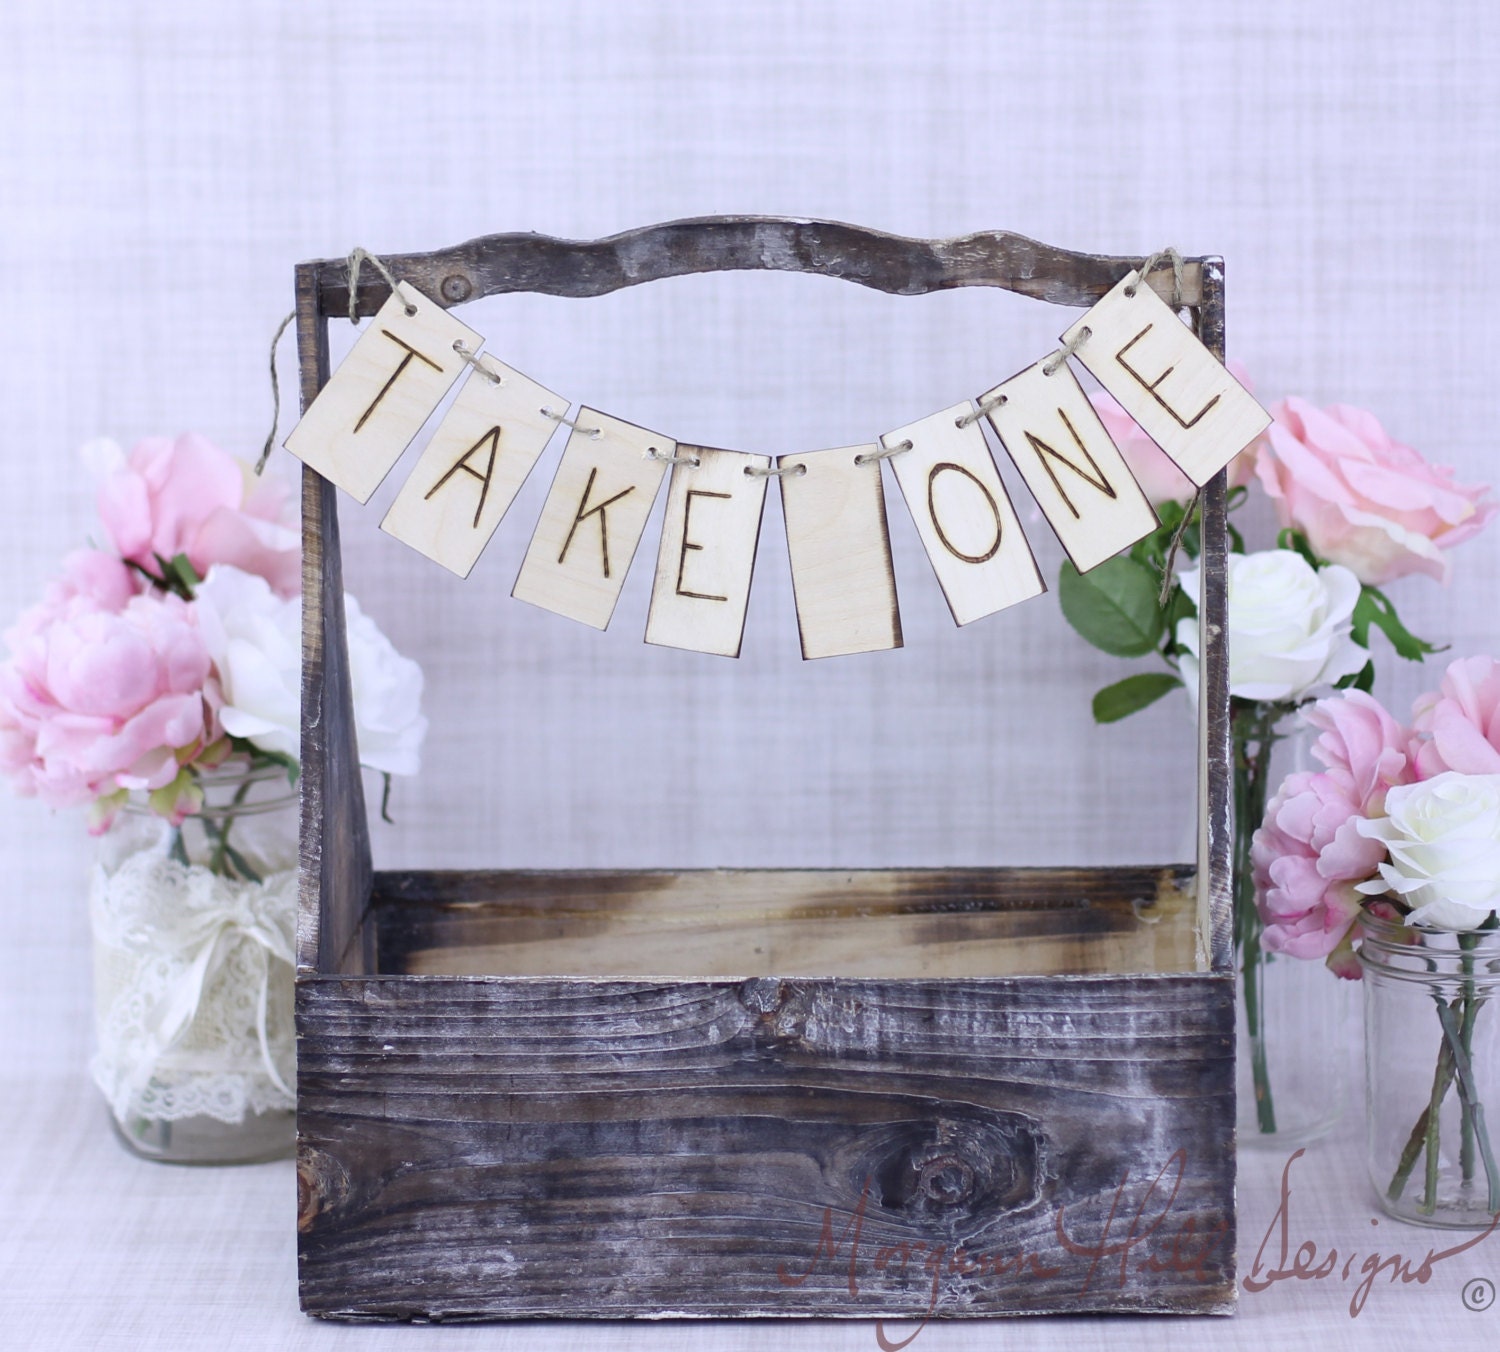 Rustic Basket With Take One Banner Sign Country Wedding Decor Barn Chic (Item Number 130029)